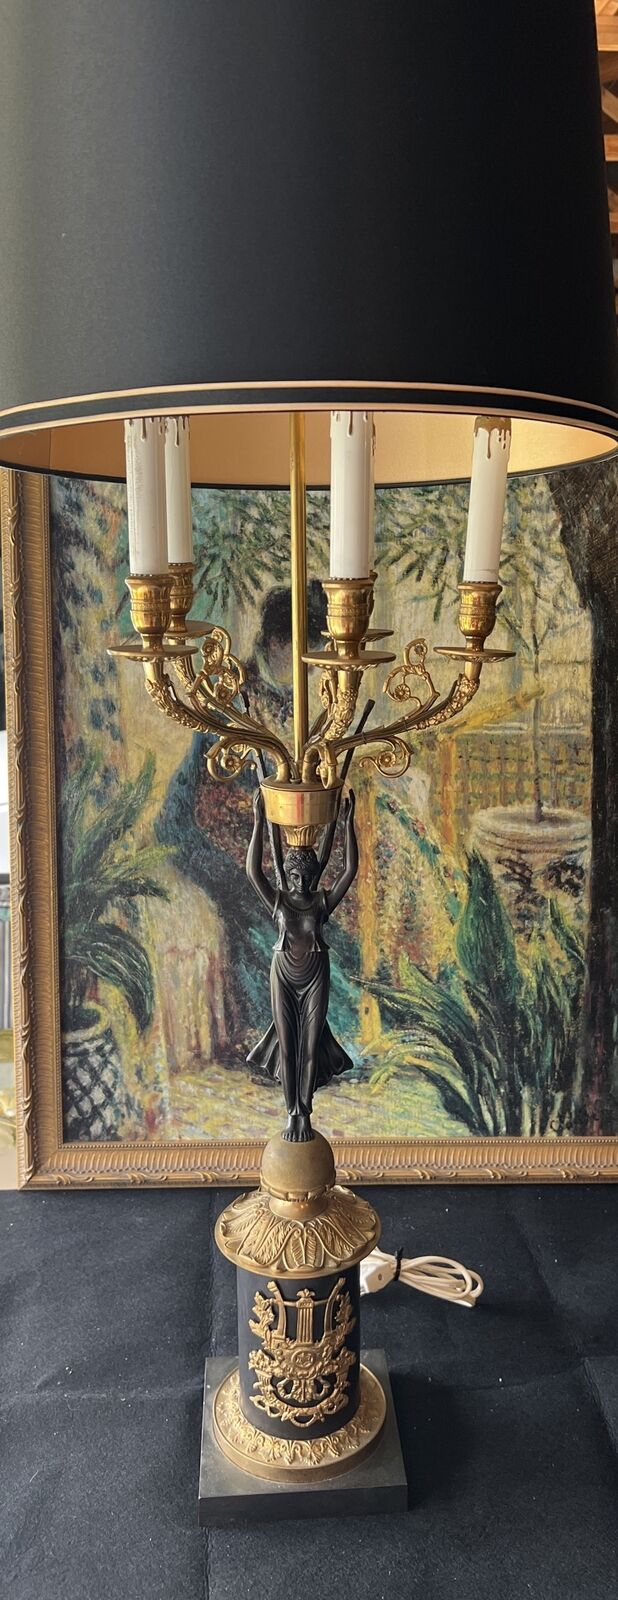 RARE FRENCH EMPIRE CANDELABRA LAMP Bronze As Seen Gilded Age Gorgeous 38”Figural